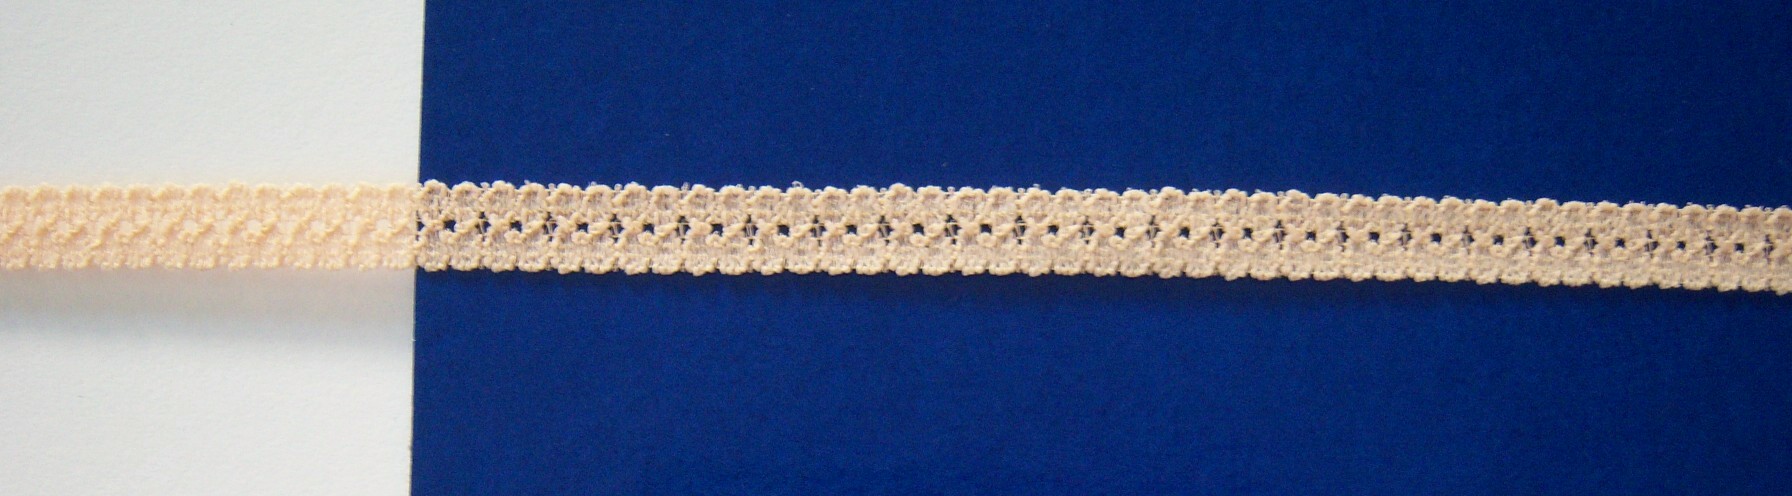 Loveable Nude 5/16" Stretch Lace